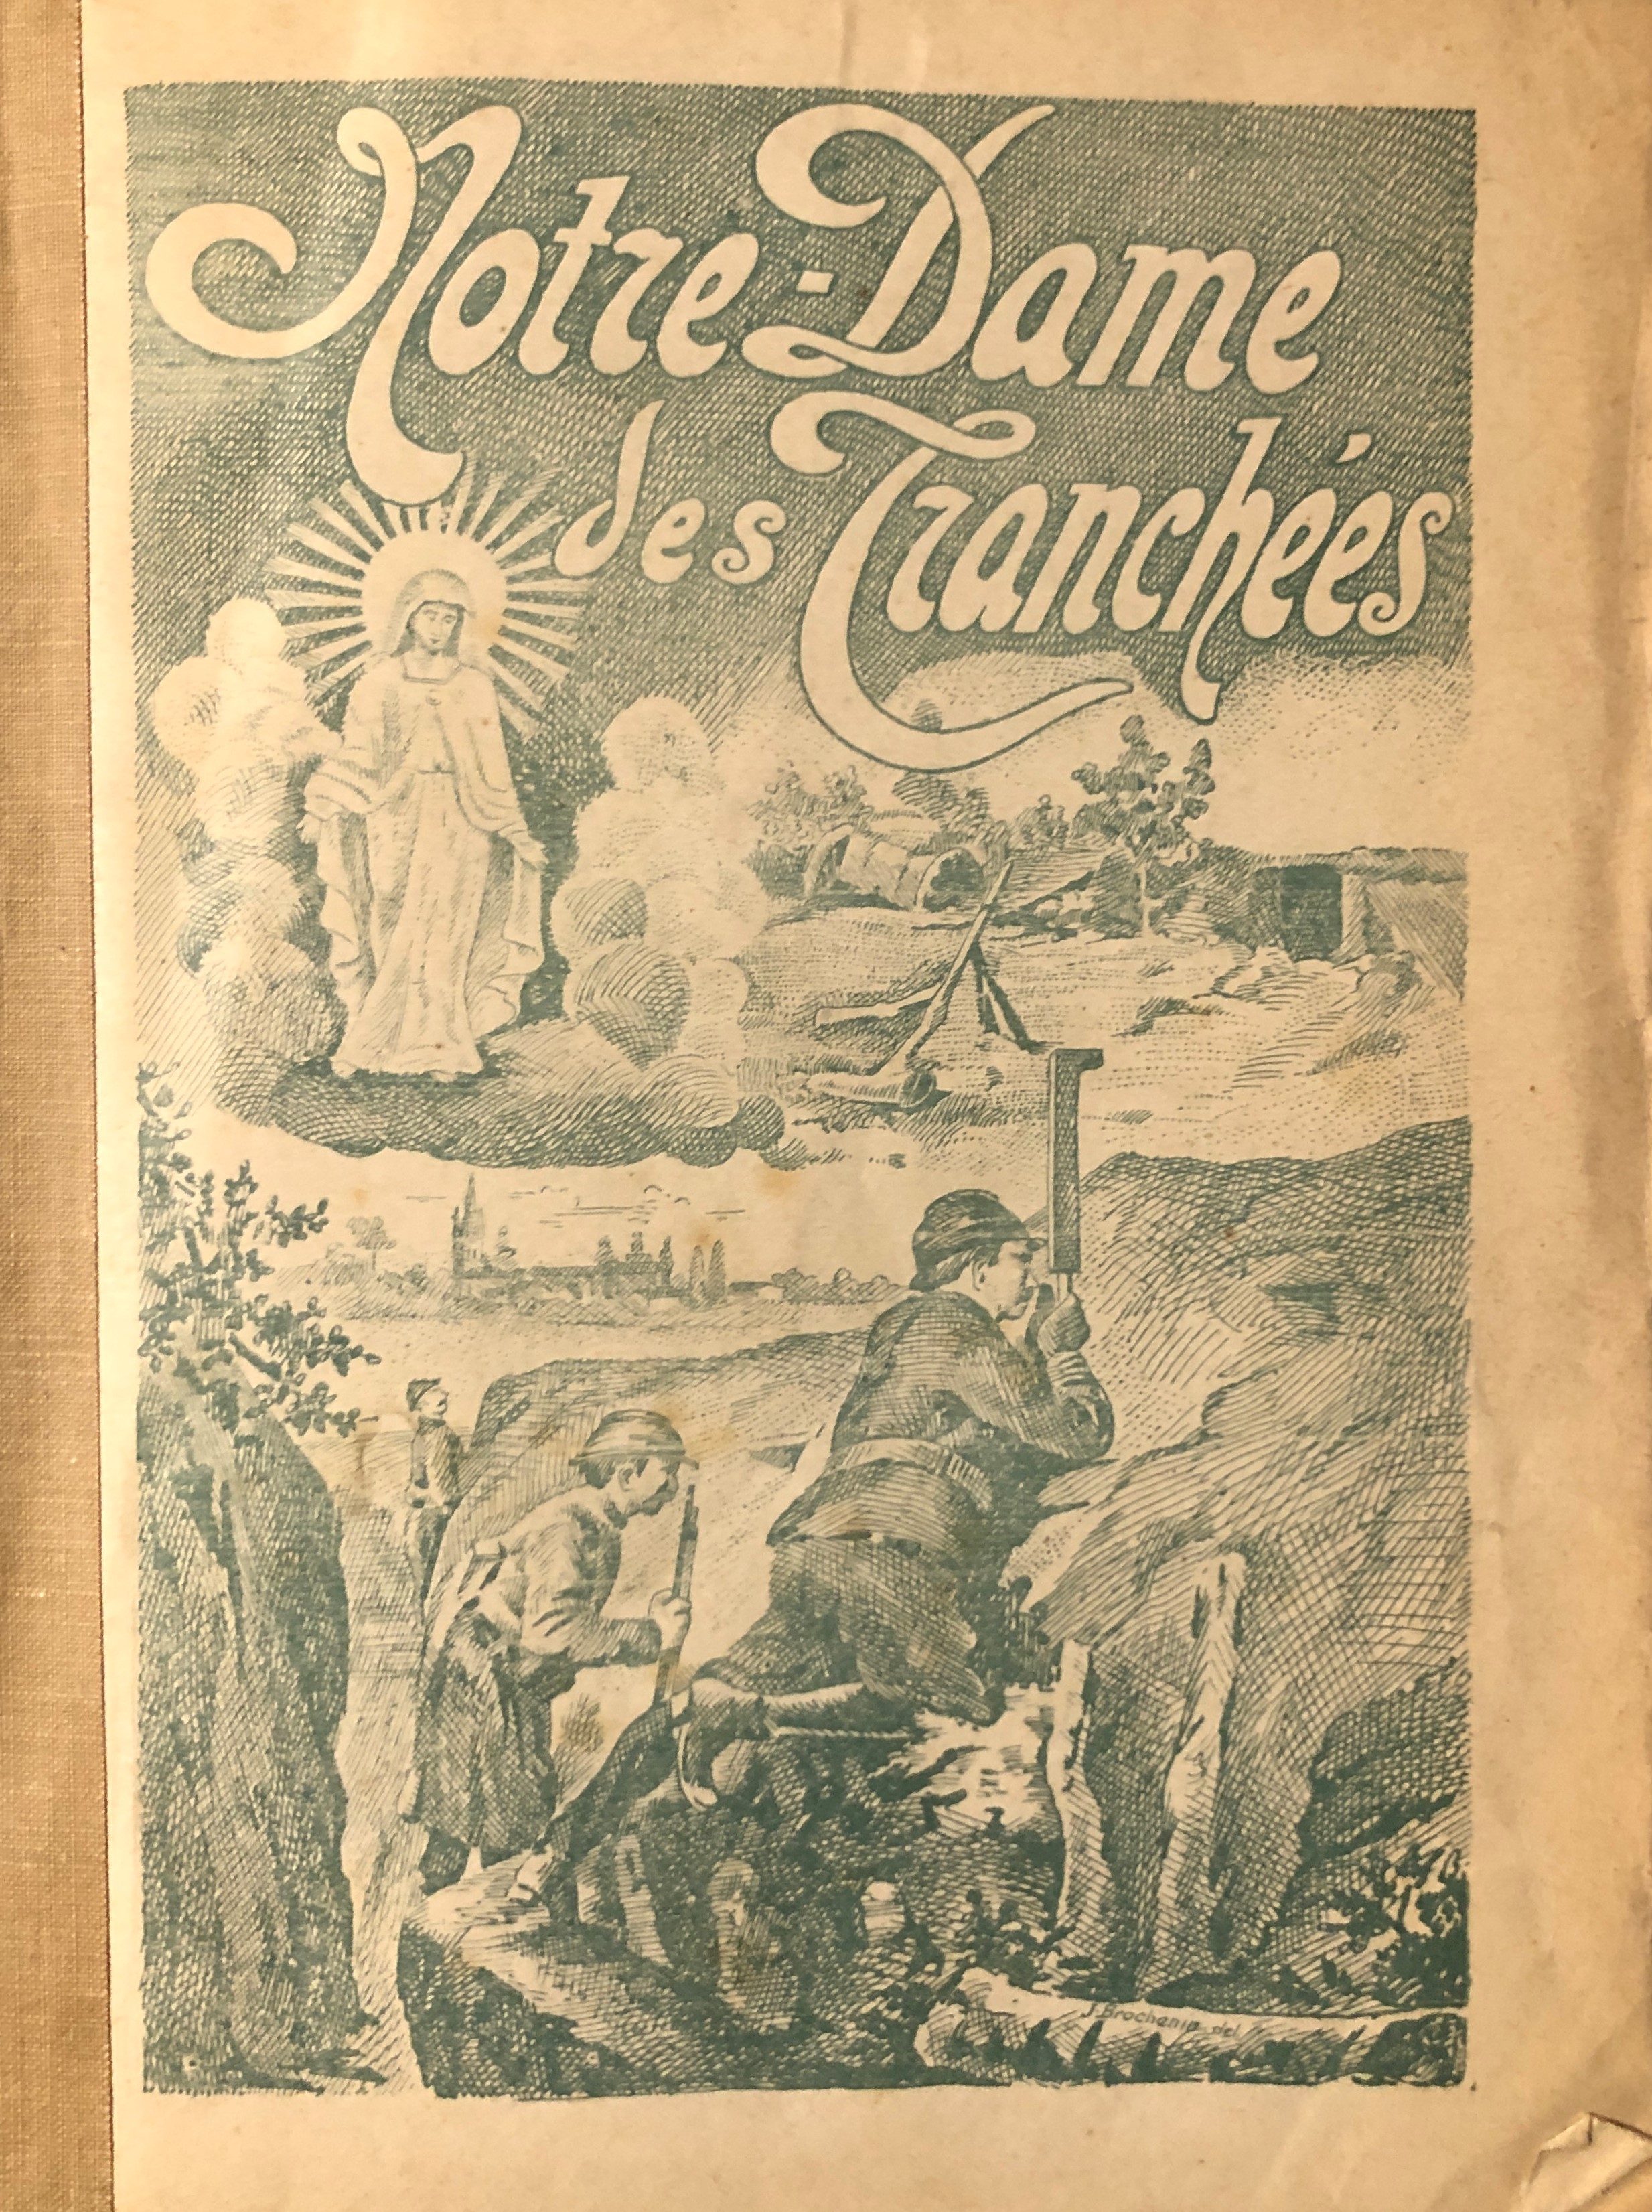 The cover of “Notre-Dame des Tranchees” depicts Mary watching over soldiers in the trenches.